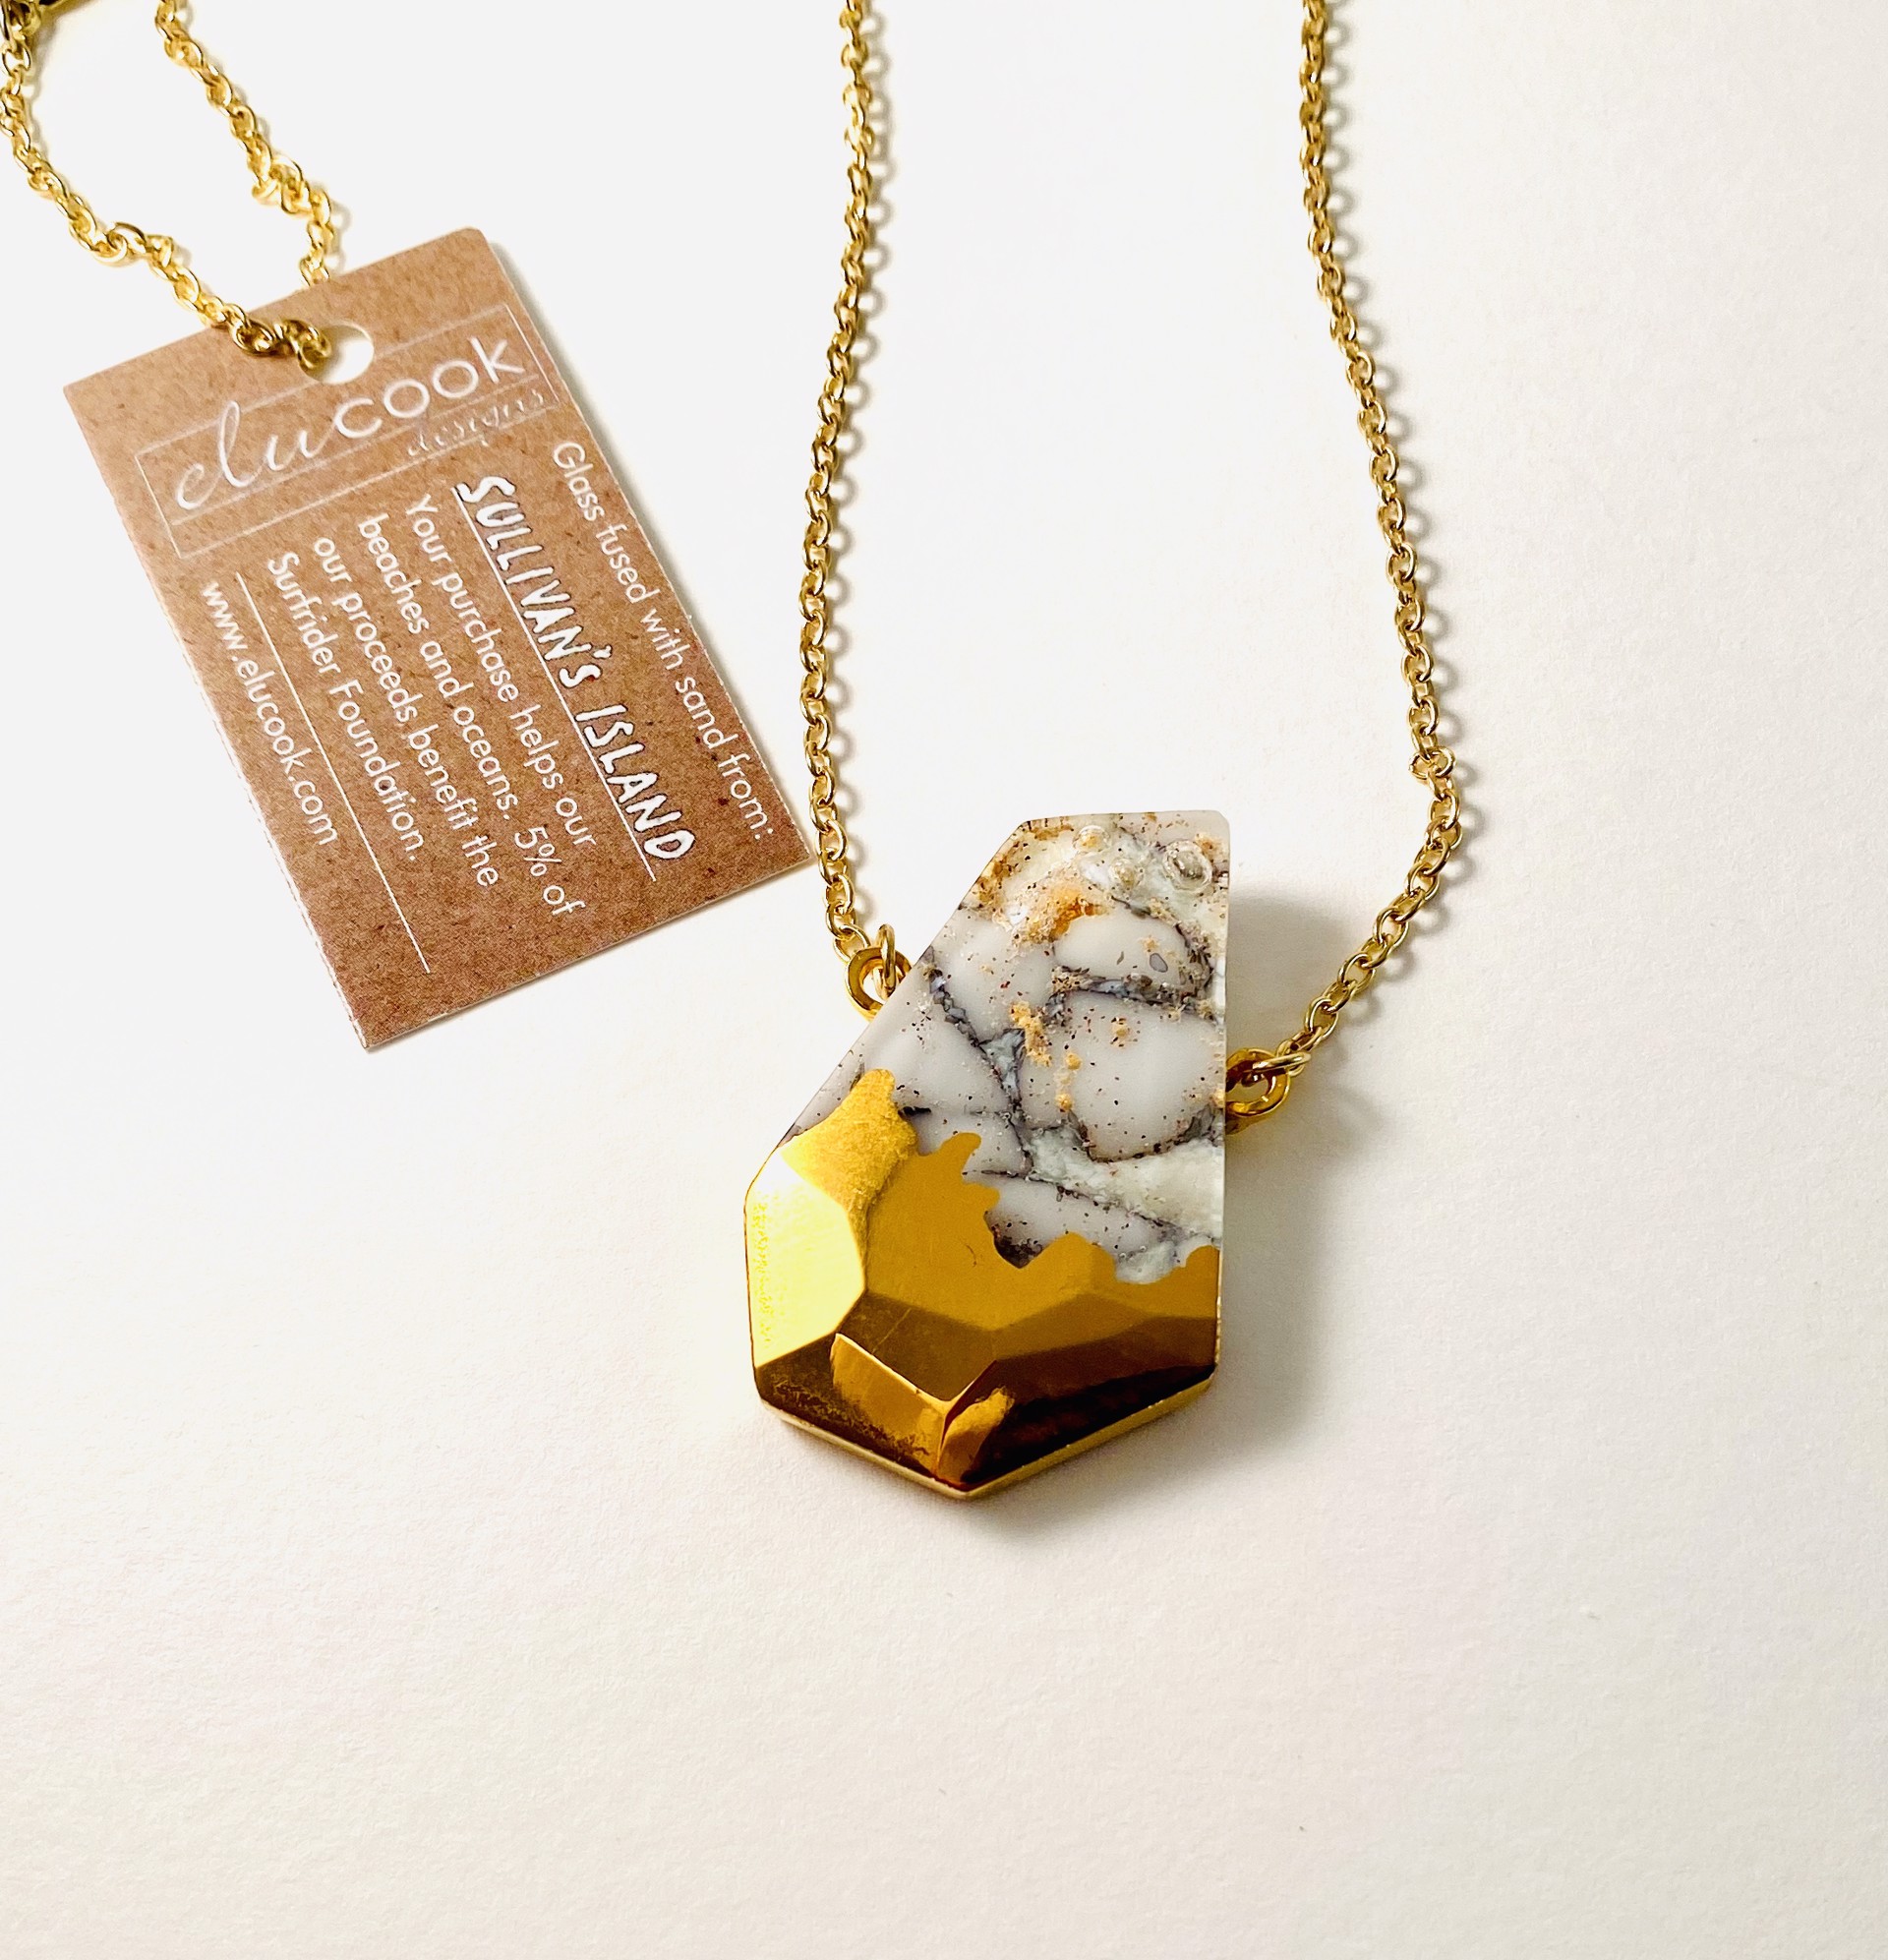 "Facets" Series Necklace 24K luster glaze, 30" gp chain, 1G by Emily Cook